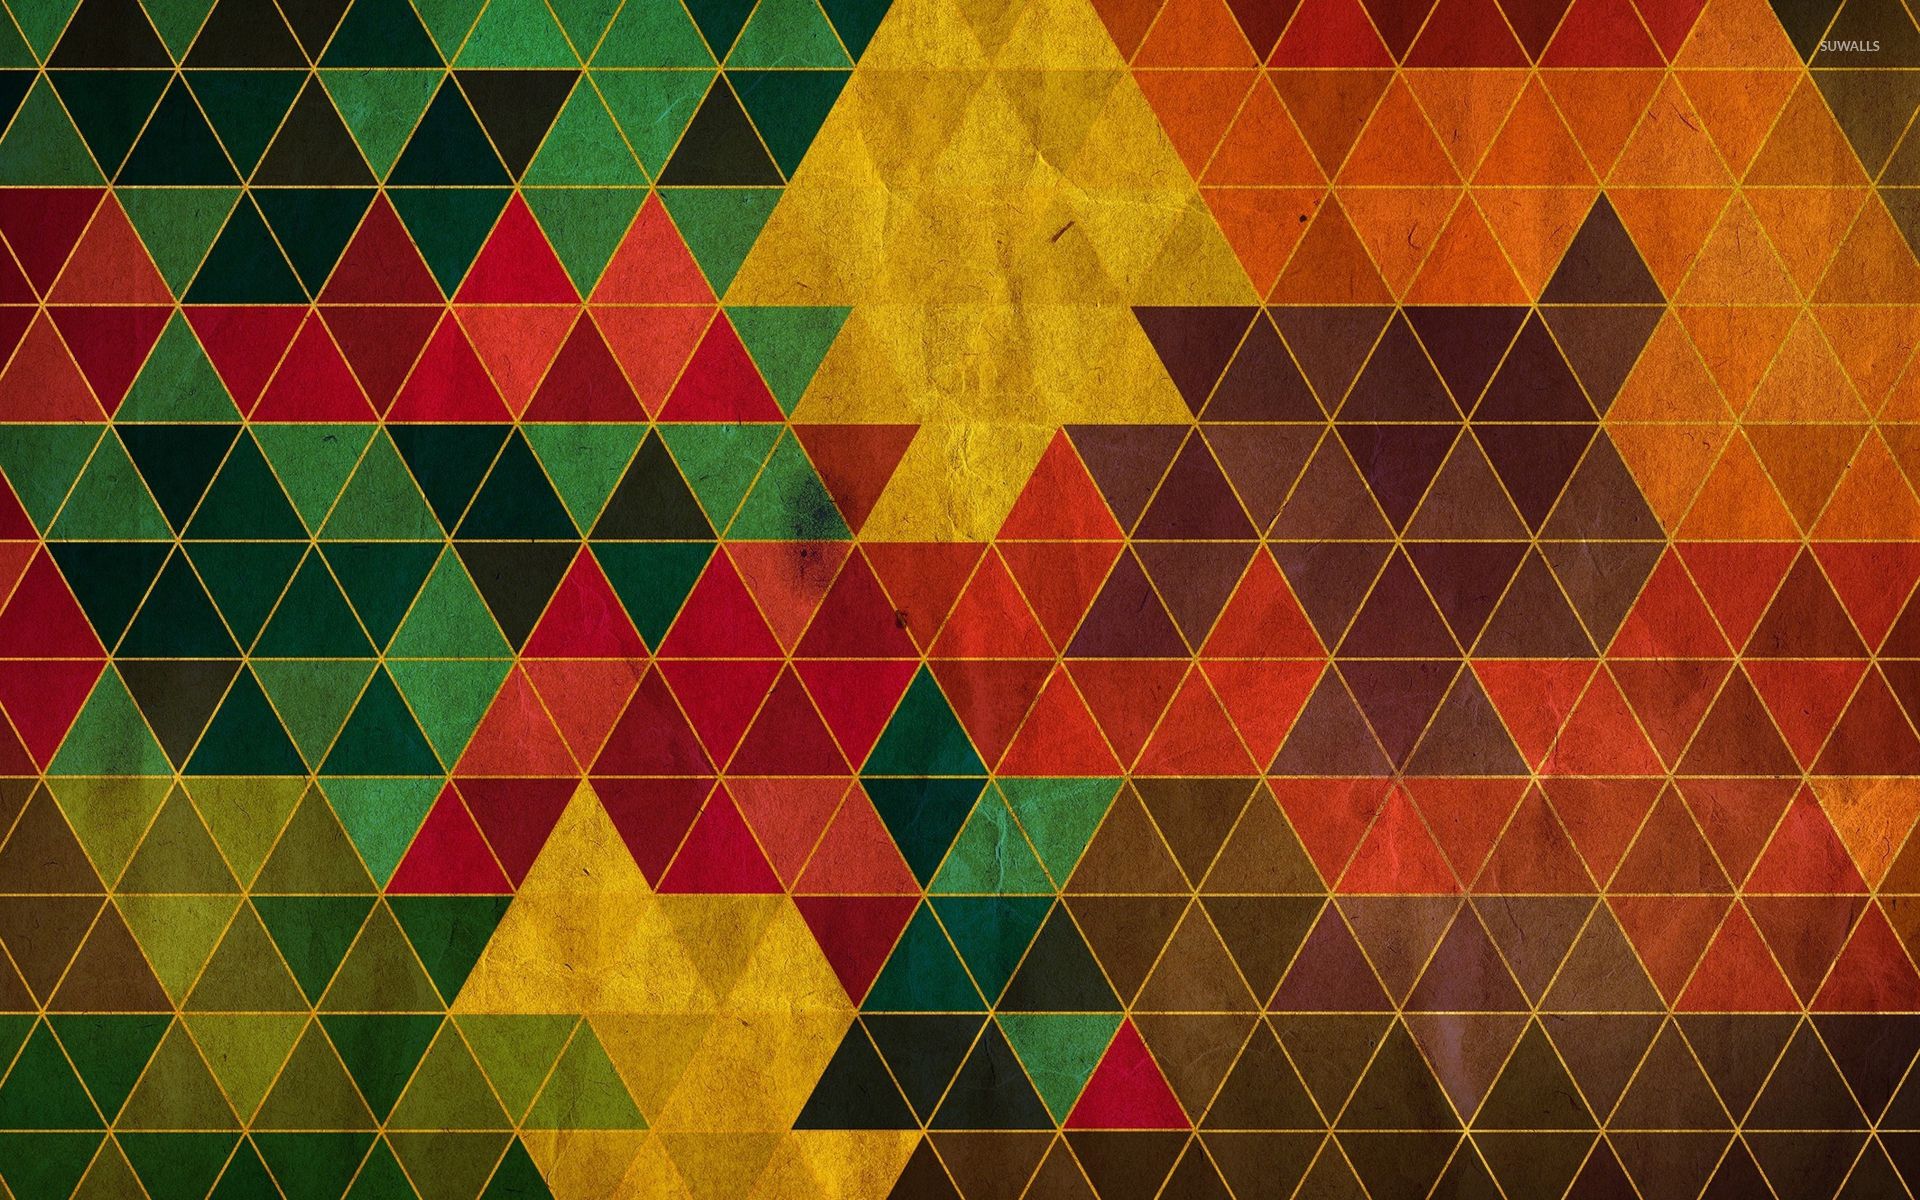 Colors on the triangle pattern wallpaper wallpaper